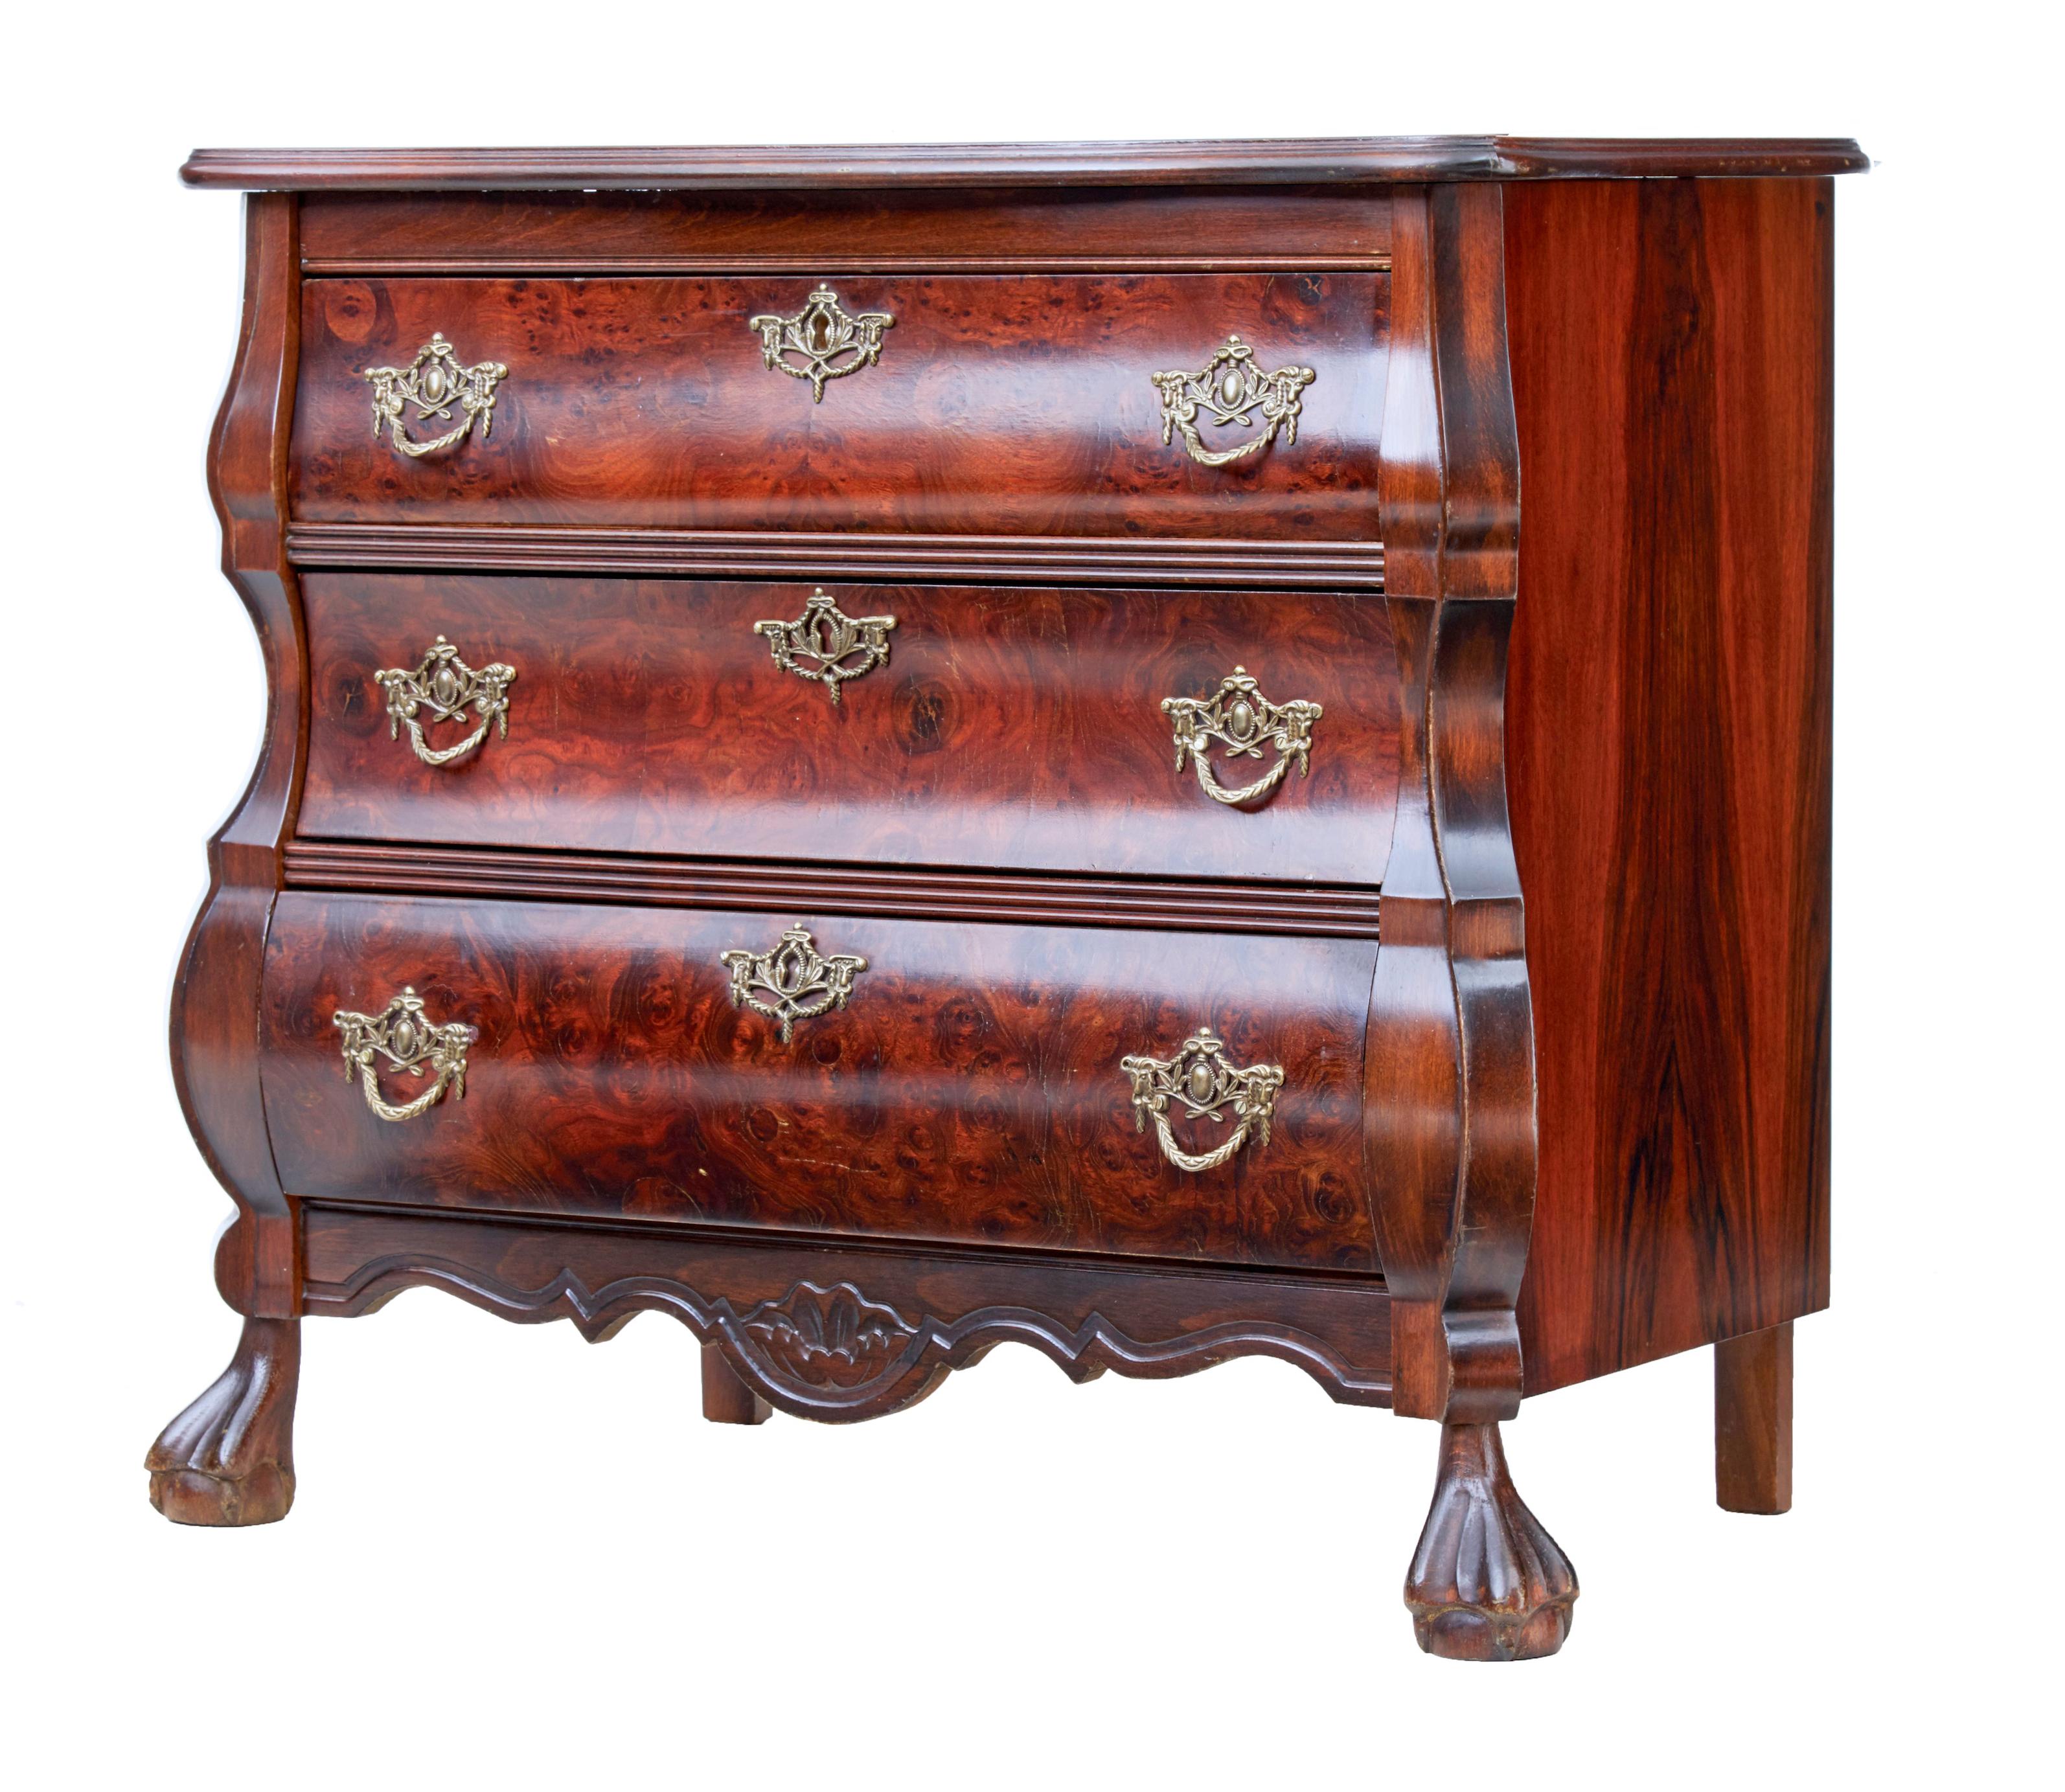 1950s small mulberry bombe shaped commode chest of drawers circa 1950.

Rococo revival chest of small proportions.

Petit Scandinavian commode circa 1950. Made in beautiful mulberry veneers. 3 drawers with ornate brass swag handles and